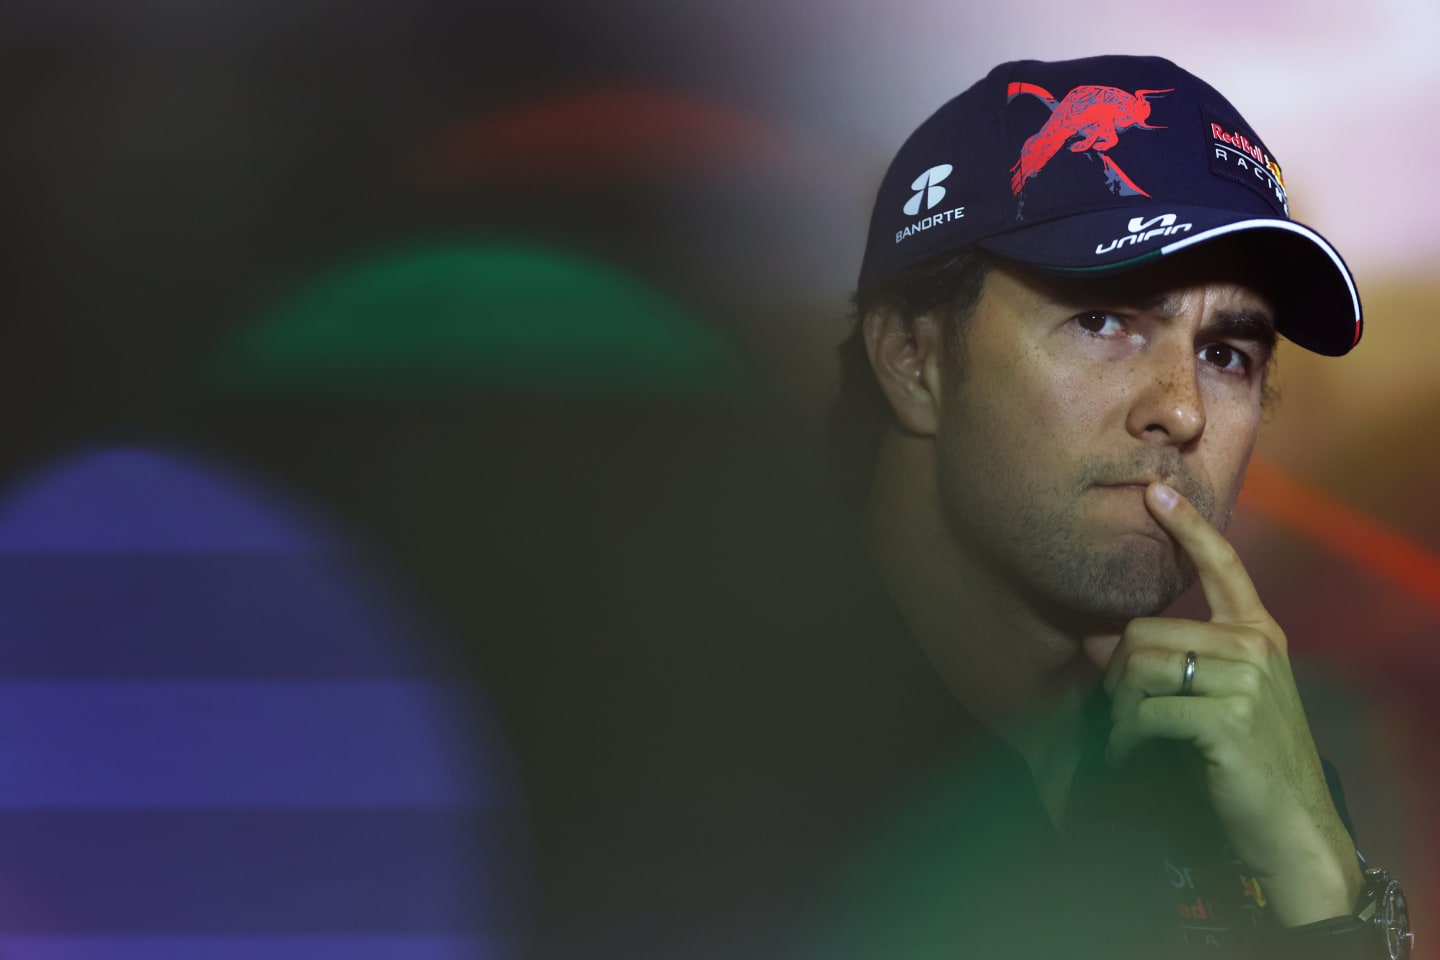 BARCELONA, SPAIN - MAY 20: Sergio Perez of Mexico and Oracle Red Bull Racing looks on in the Drivers Press Conference prior to practice ahead of the F1 Grand Prix of Spain at Circuit de Barcelona-Catalunya on May 20, 2022 in Barcelona, Spain. (Photo by Lars Baron/Getty Images)